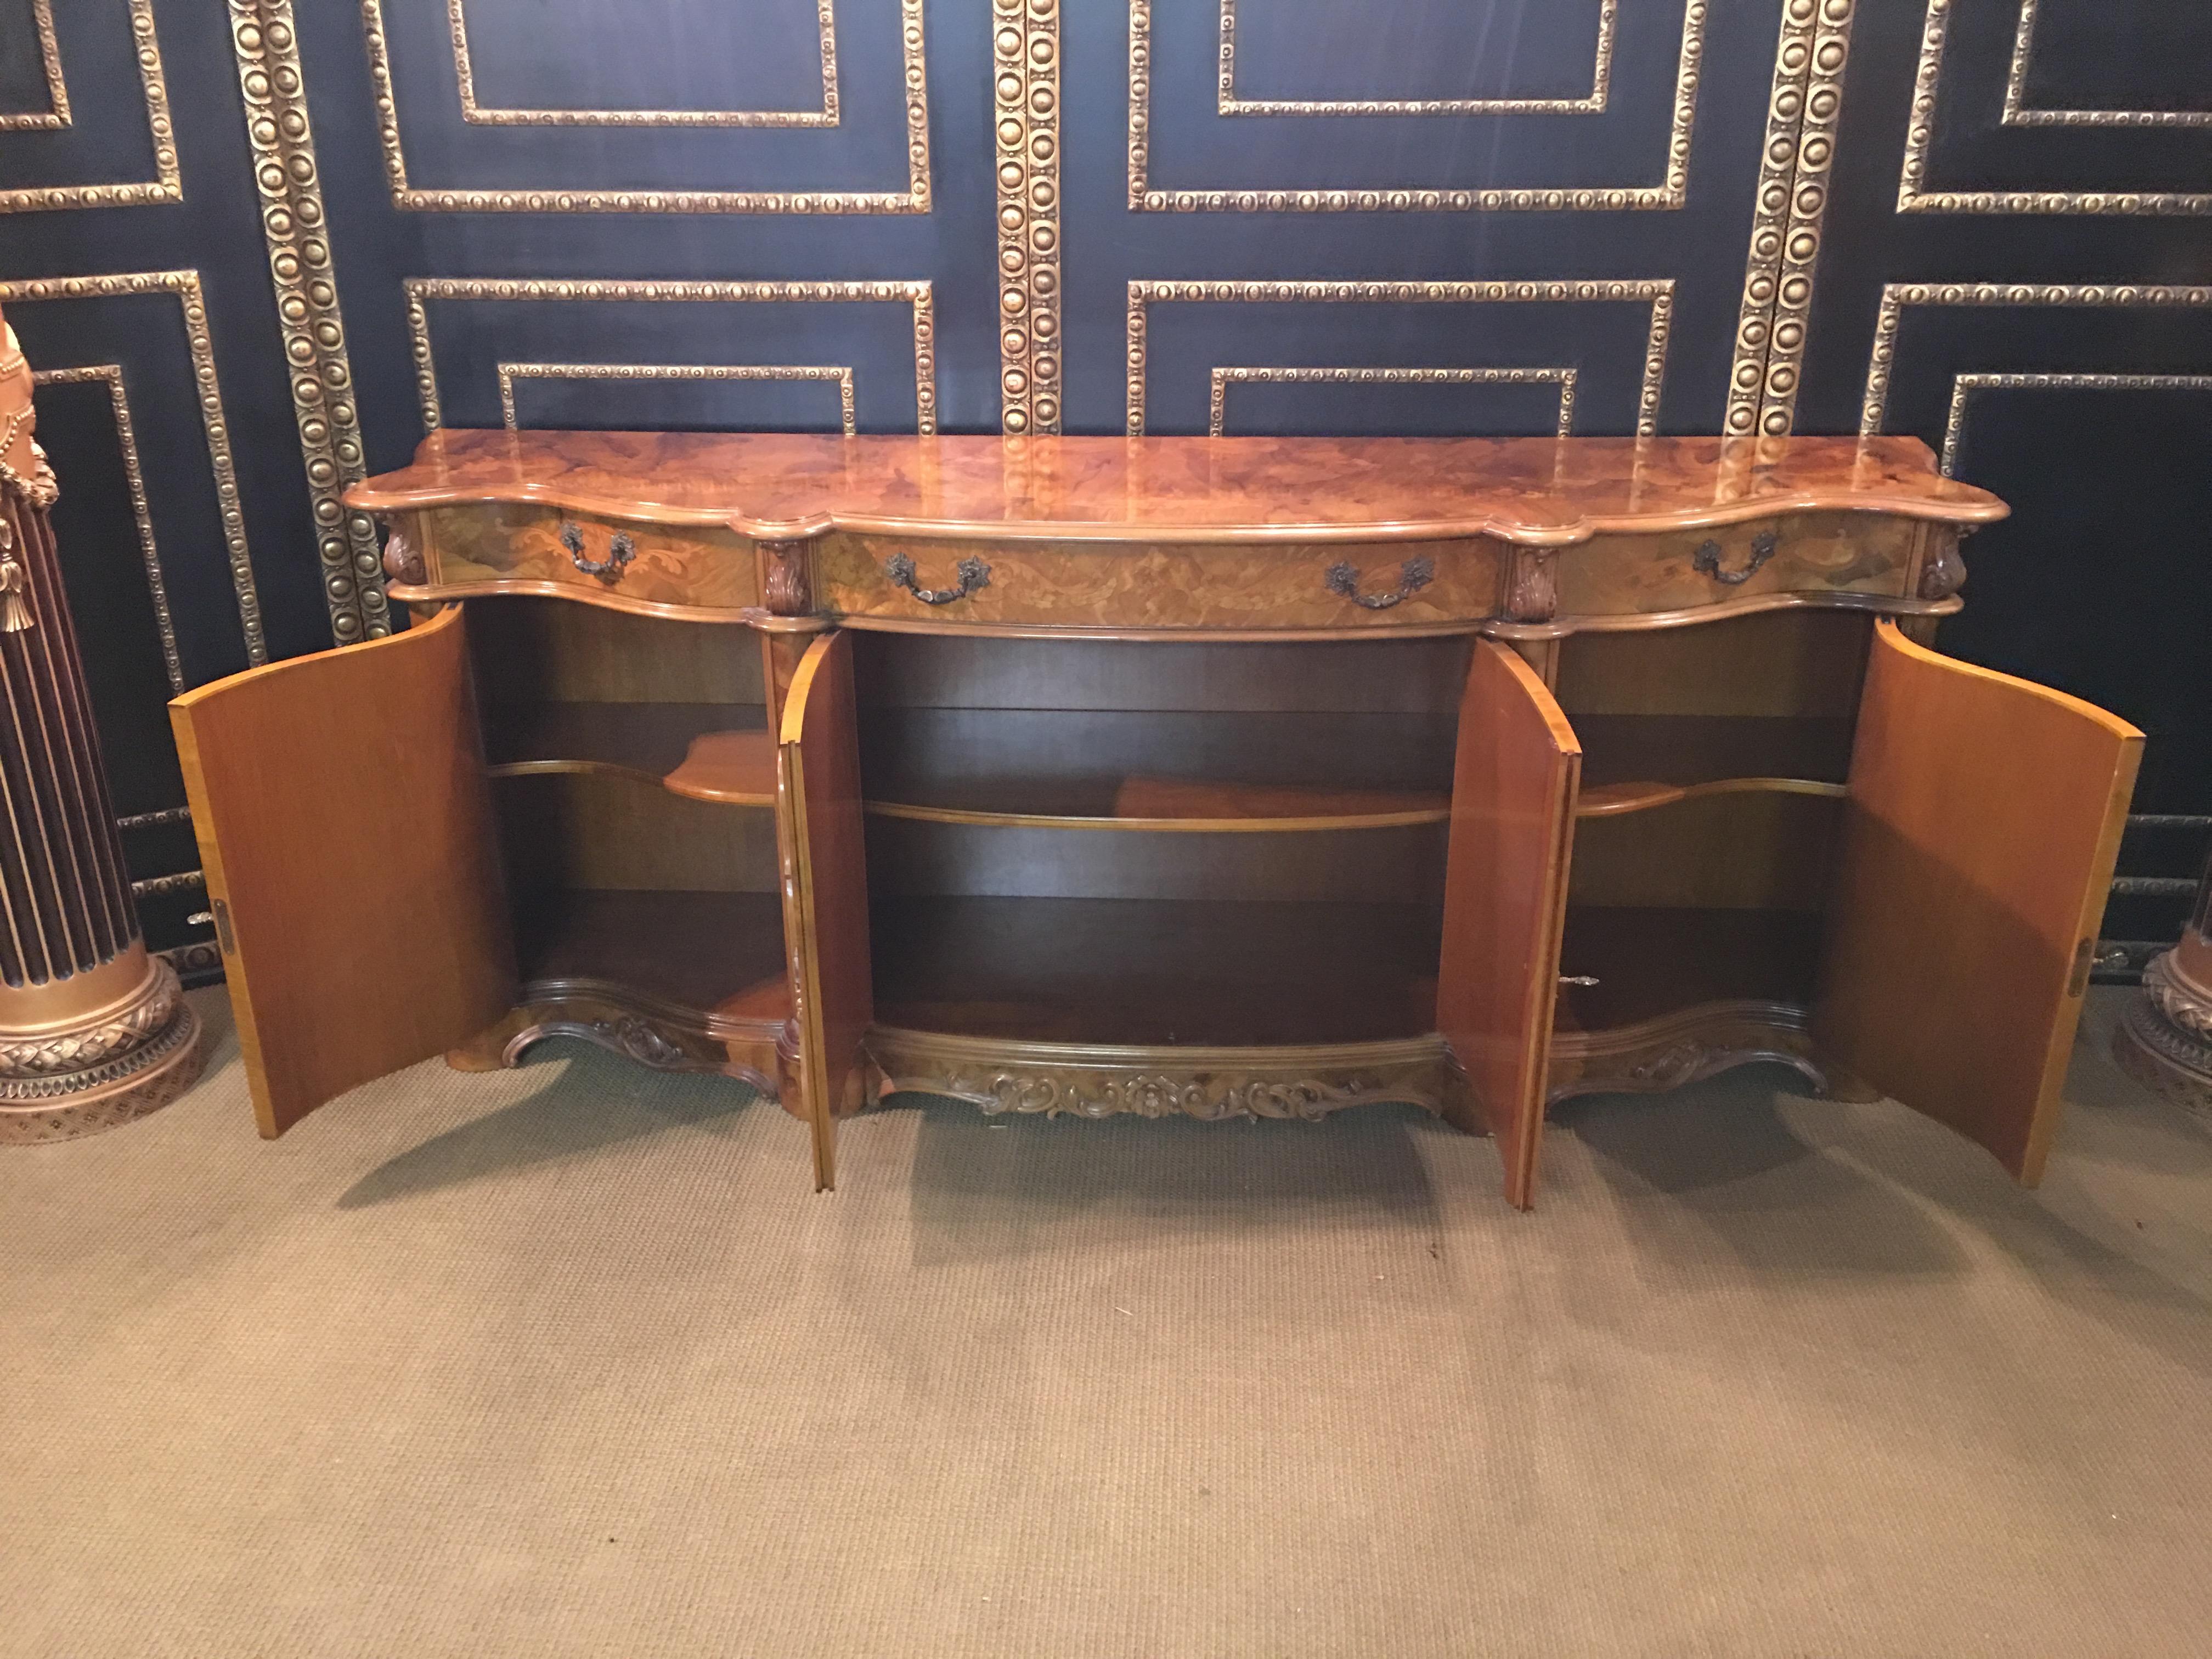 Absolut and One of a Kind, Sideboard in Finest Walnut with Inlays 7